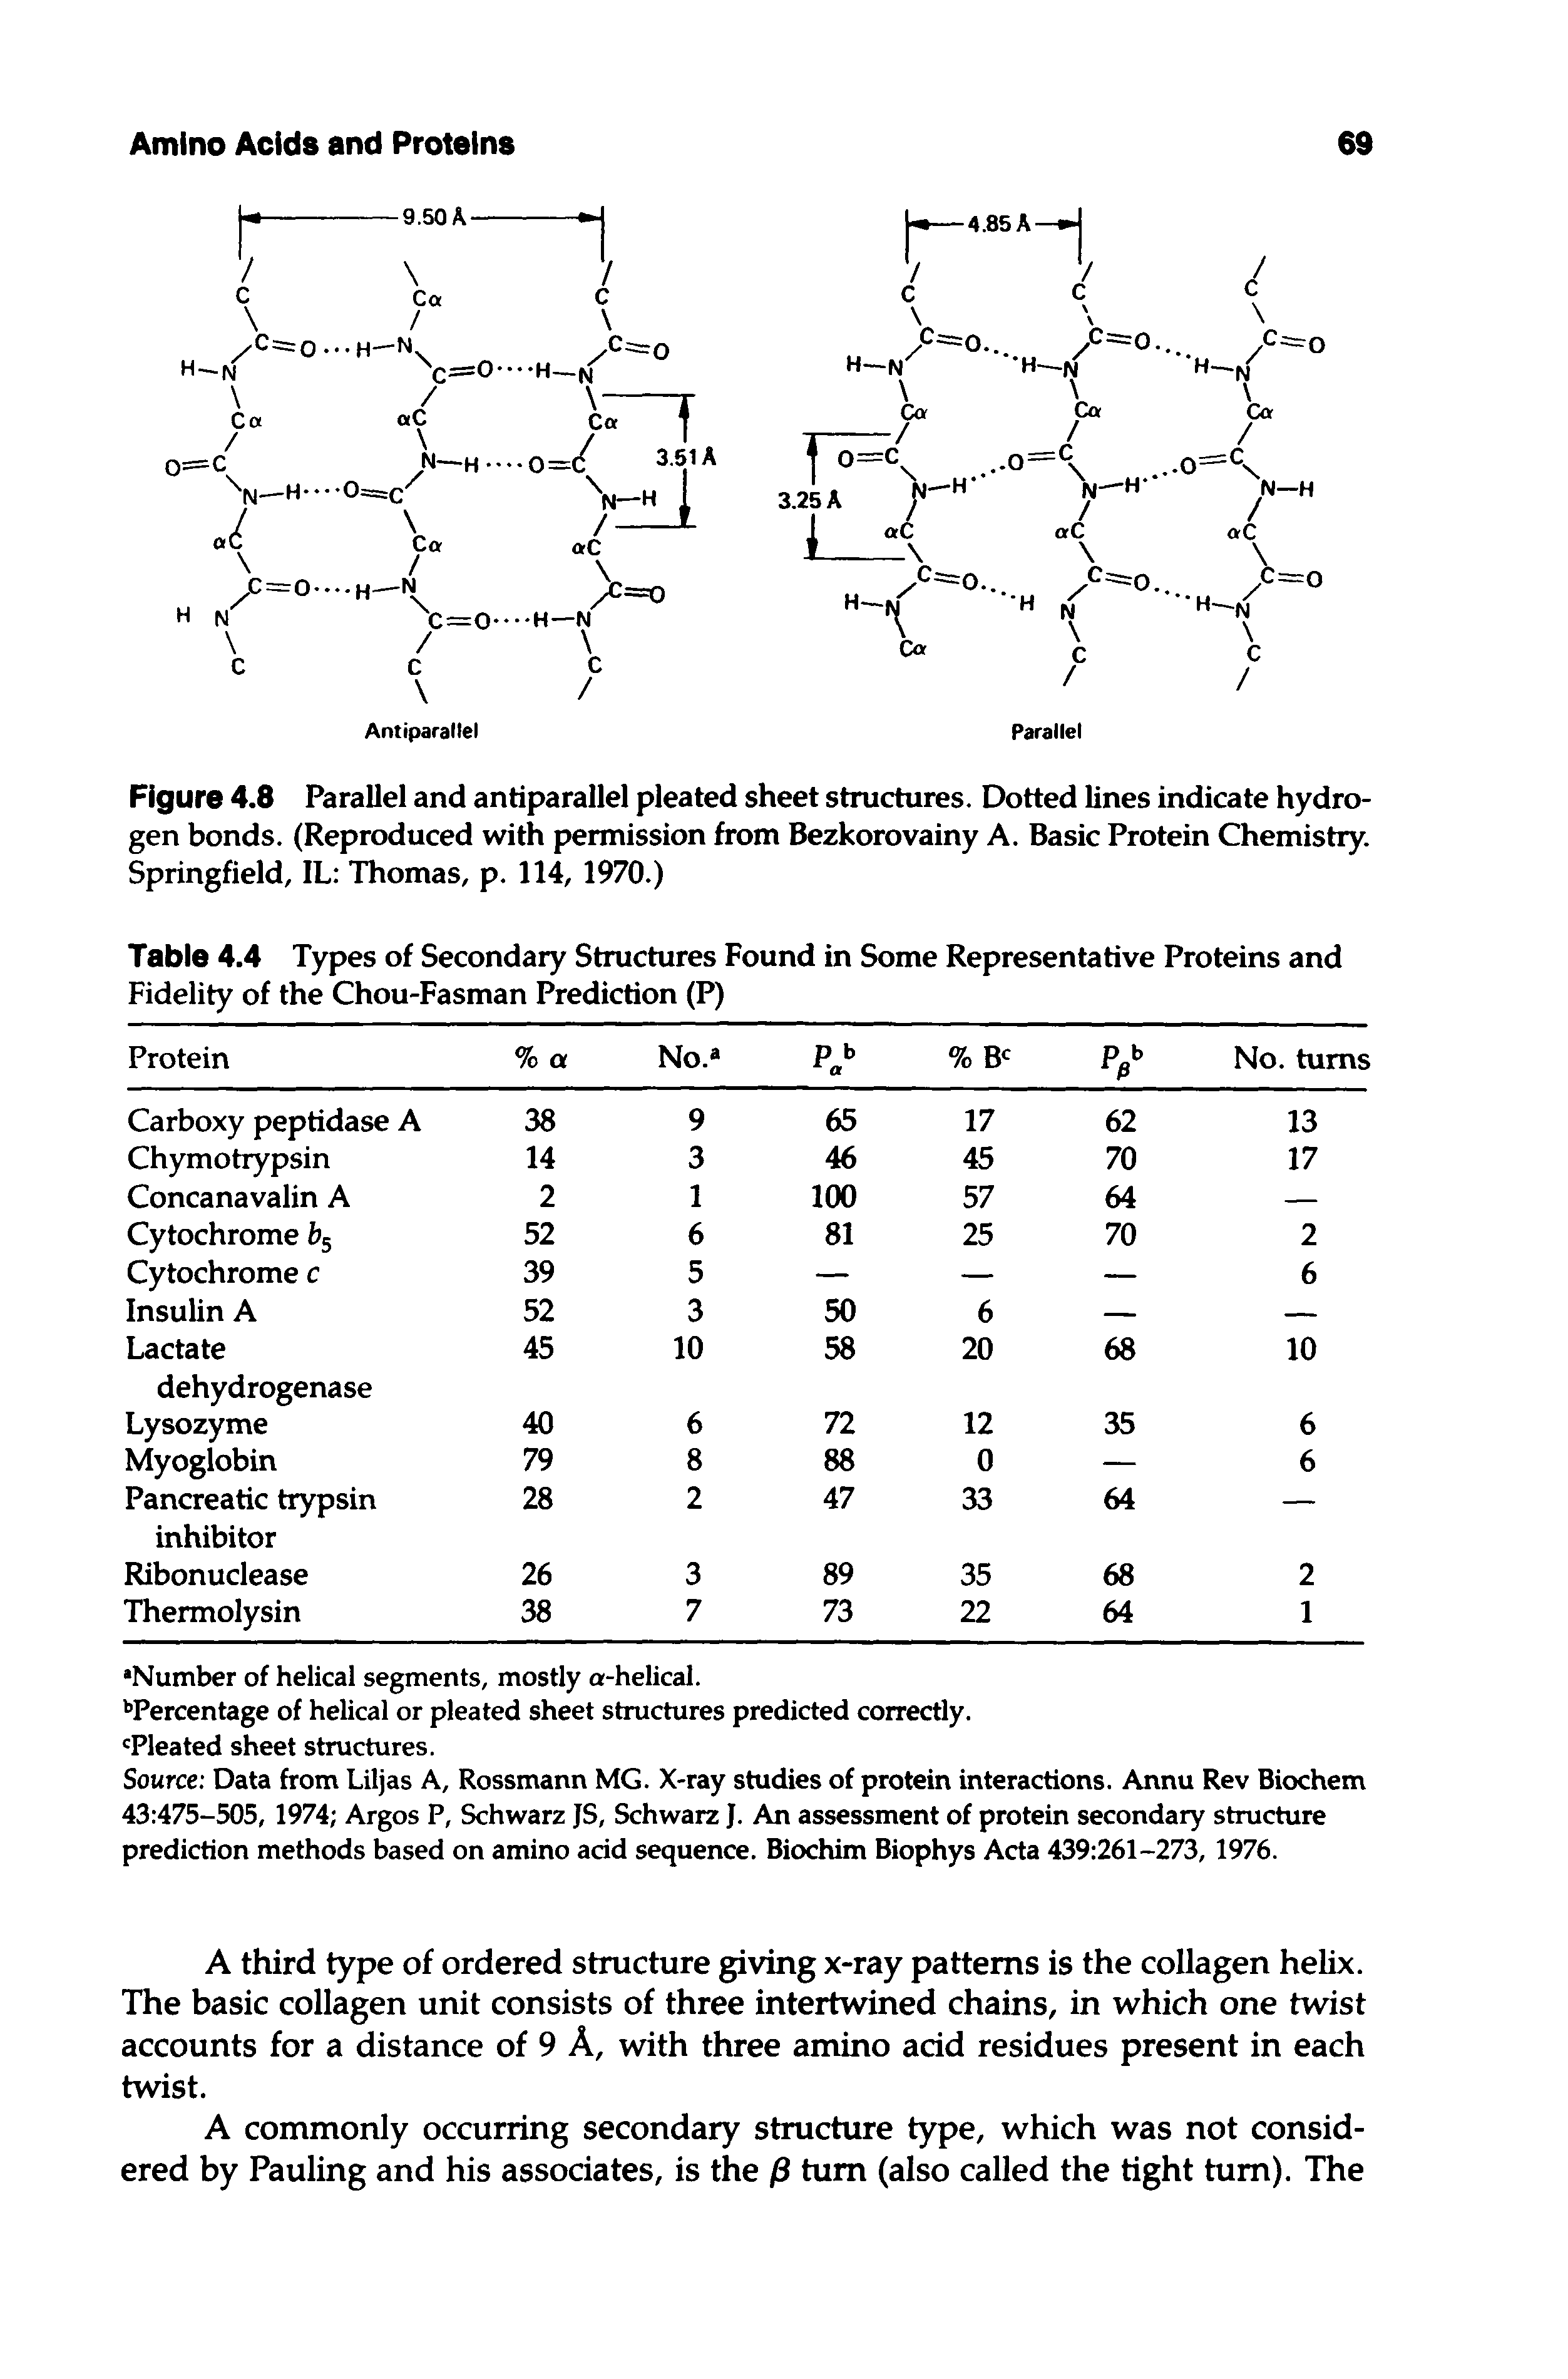 Figure 4.8 Parallel and antiparallel pleated sheet structures. Dotted lines indicate hydrogen bonds. (Reproduced with permission from Bezkorovainy A. Basic Protein Chemistry. Springfield, IL Thomas, p. 114, 1970.)...